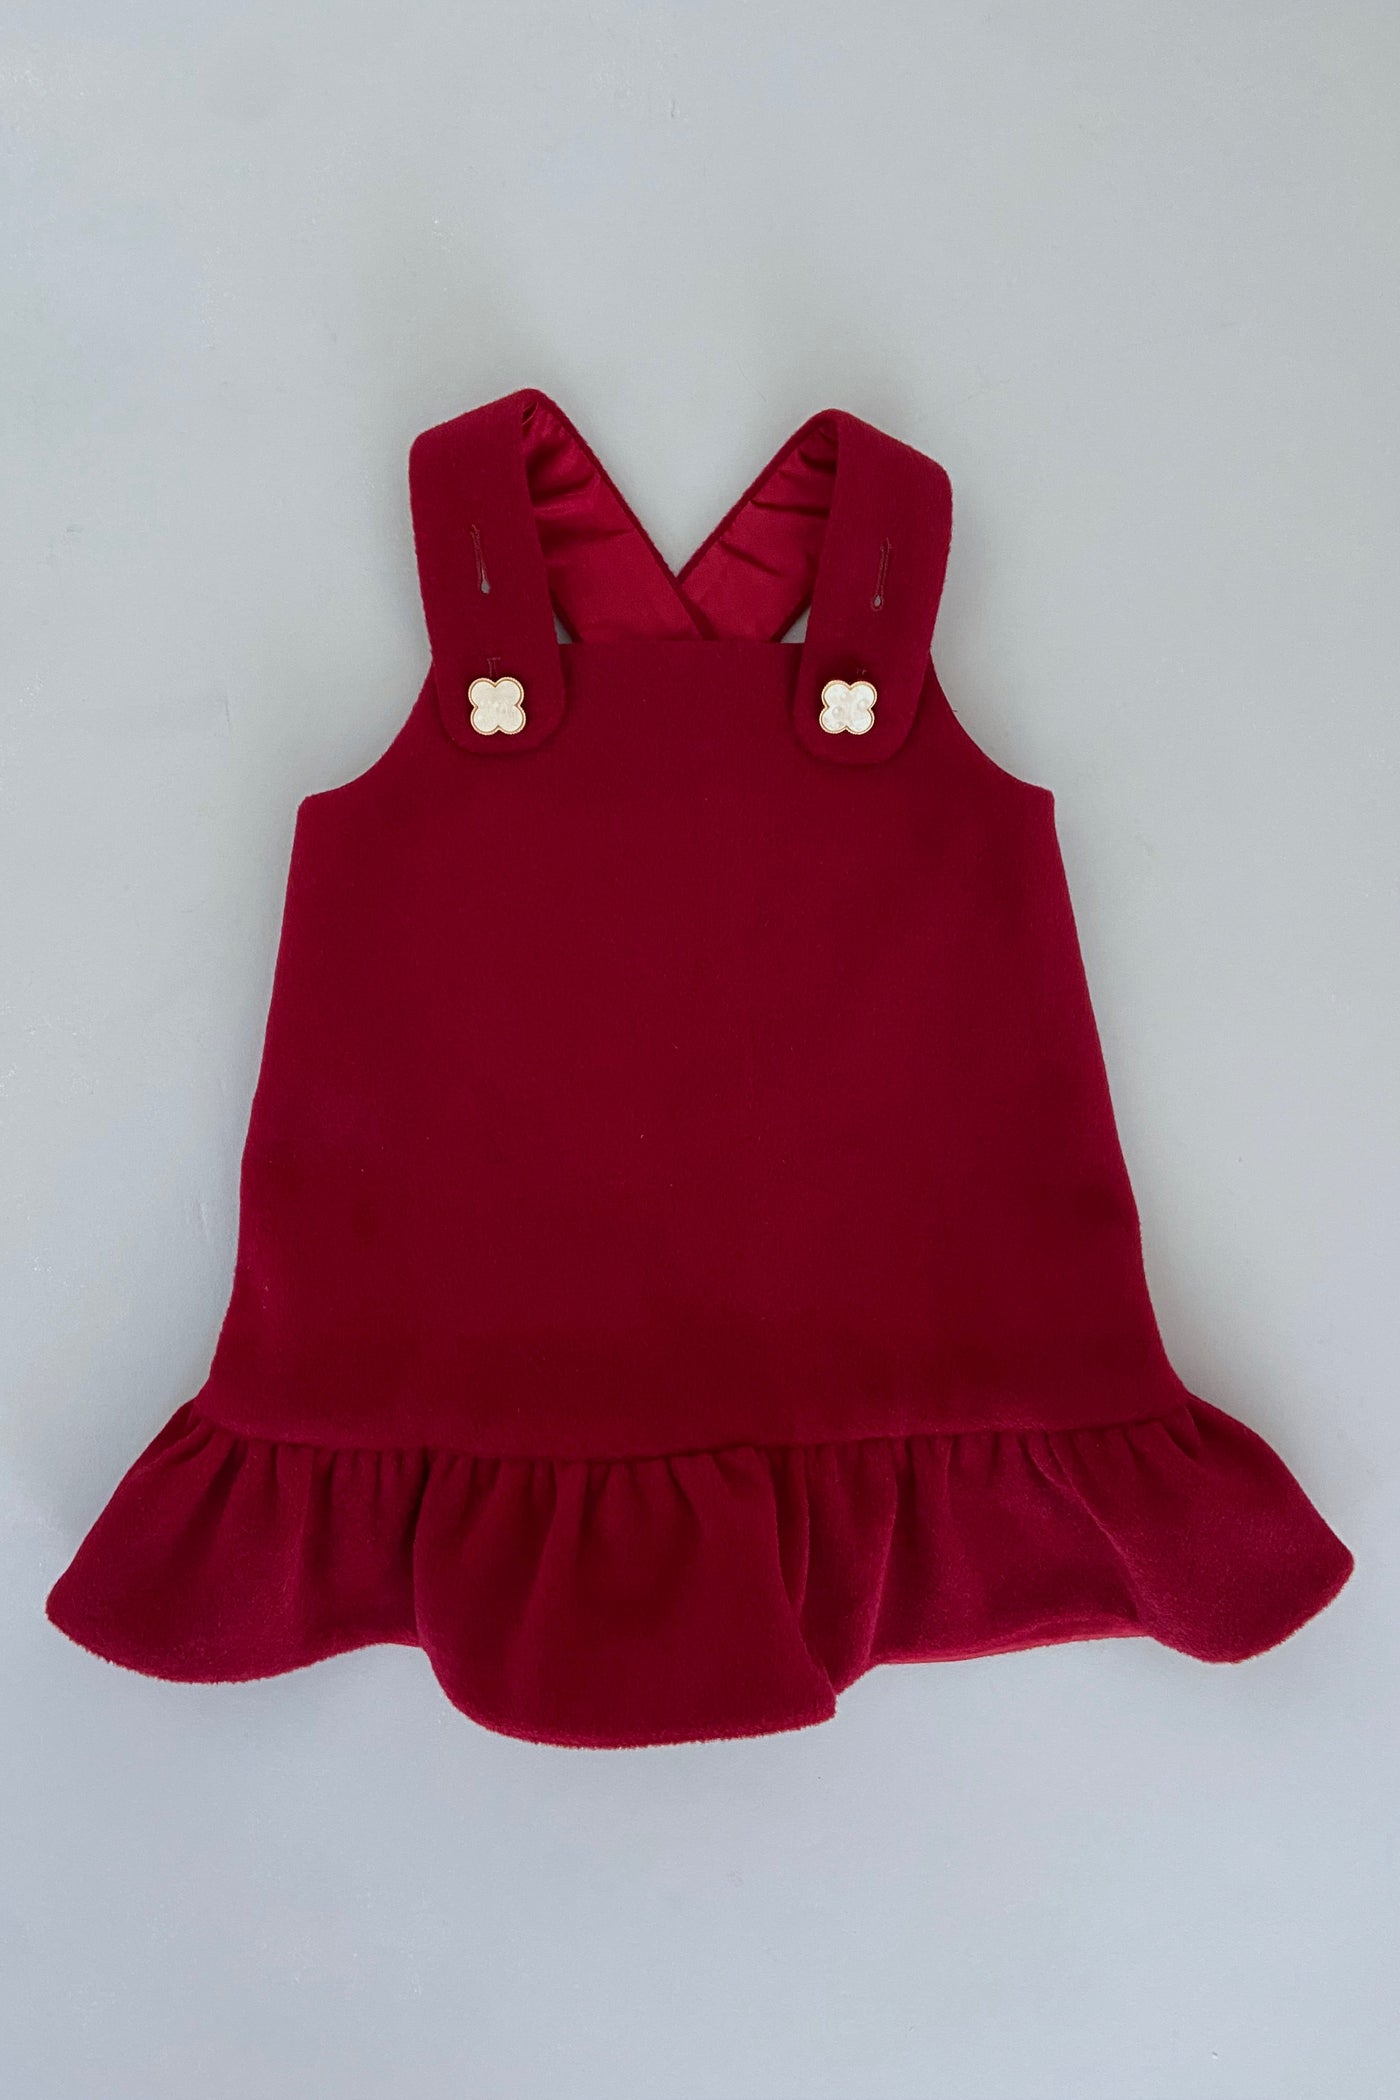 In The Sky Pinafore Dress - Cherry Bloom